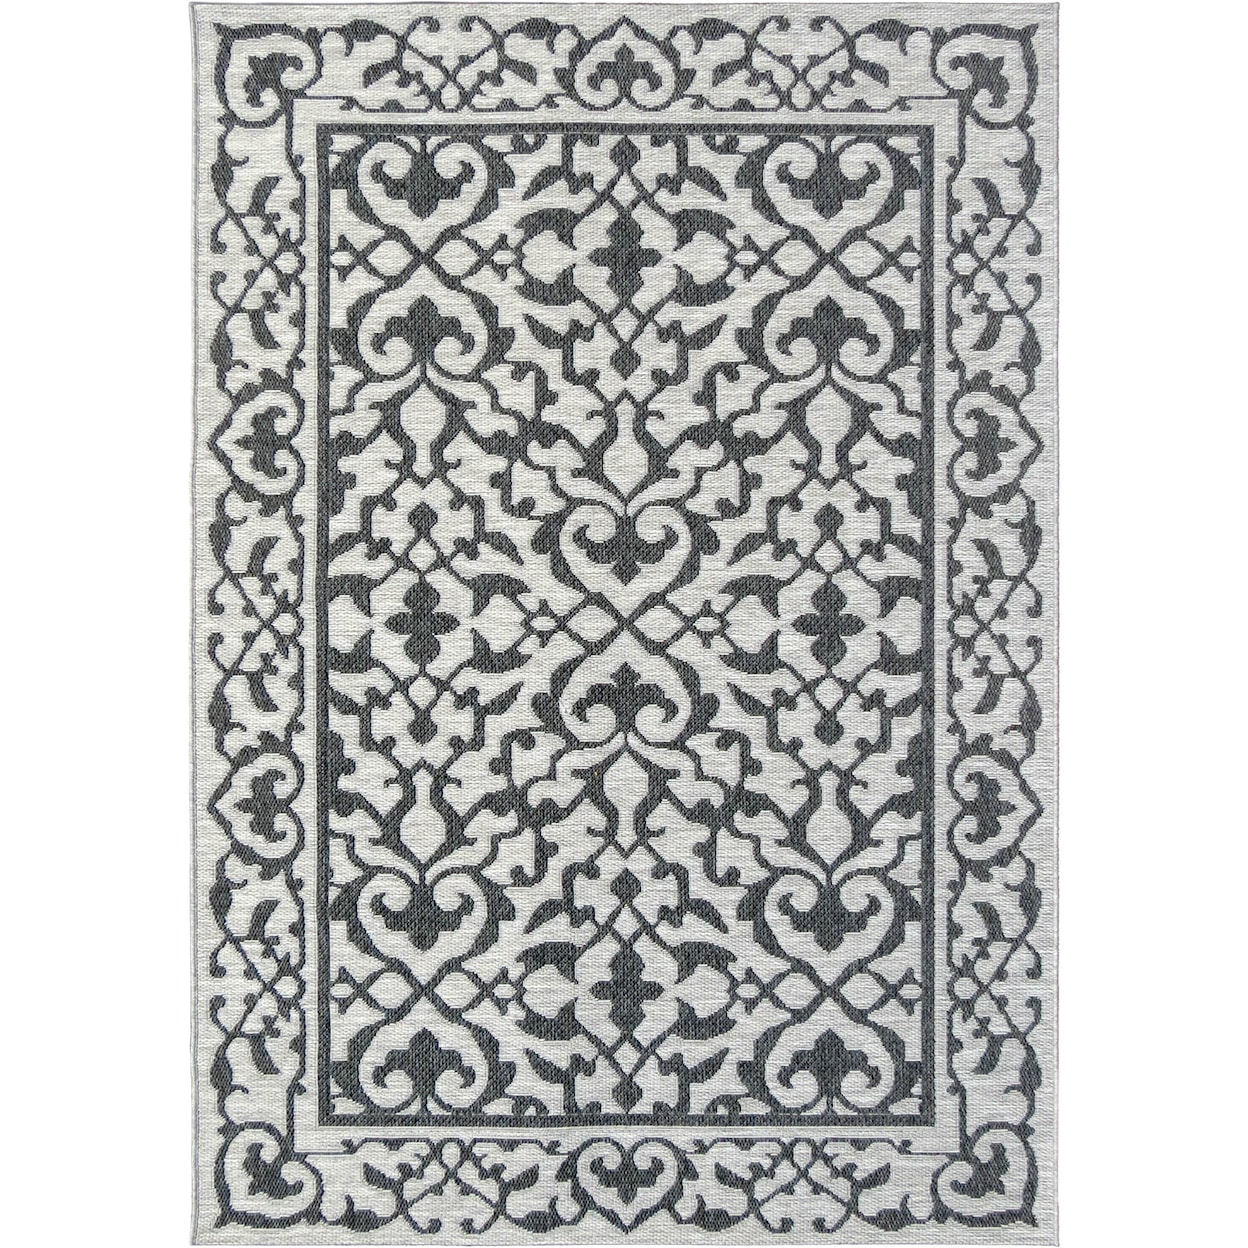 Orian Rugs Jersey Home Simone anthracite/grey 5'1" x 7'6" Rug